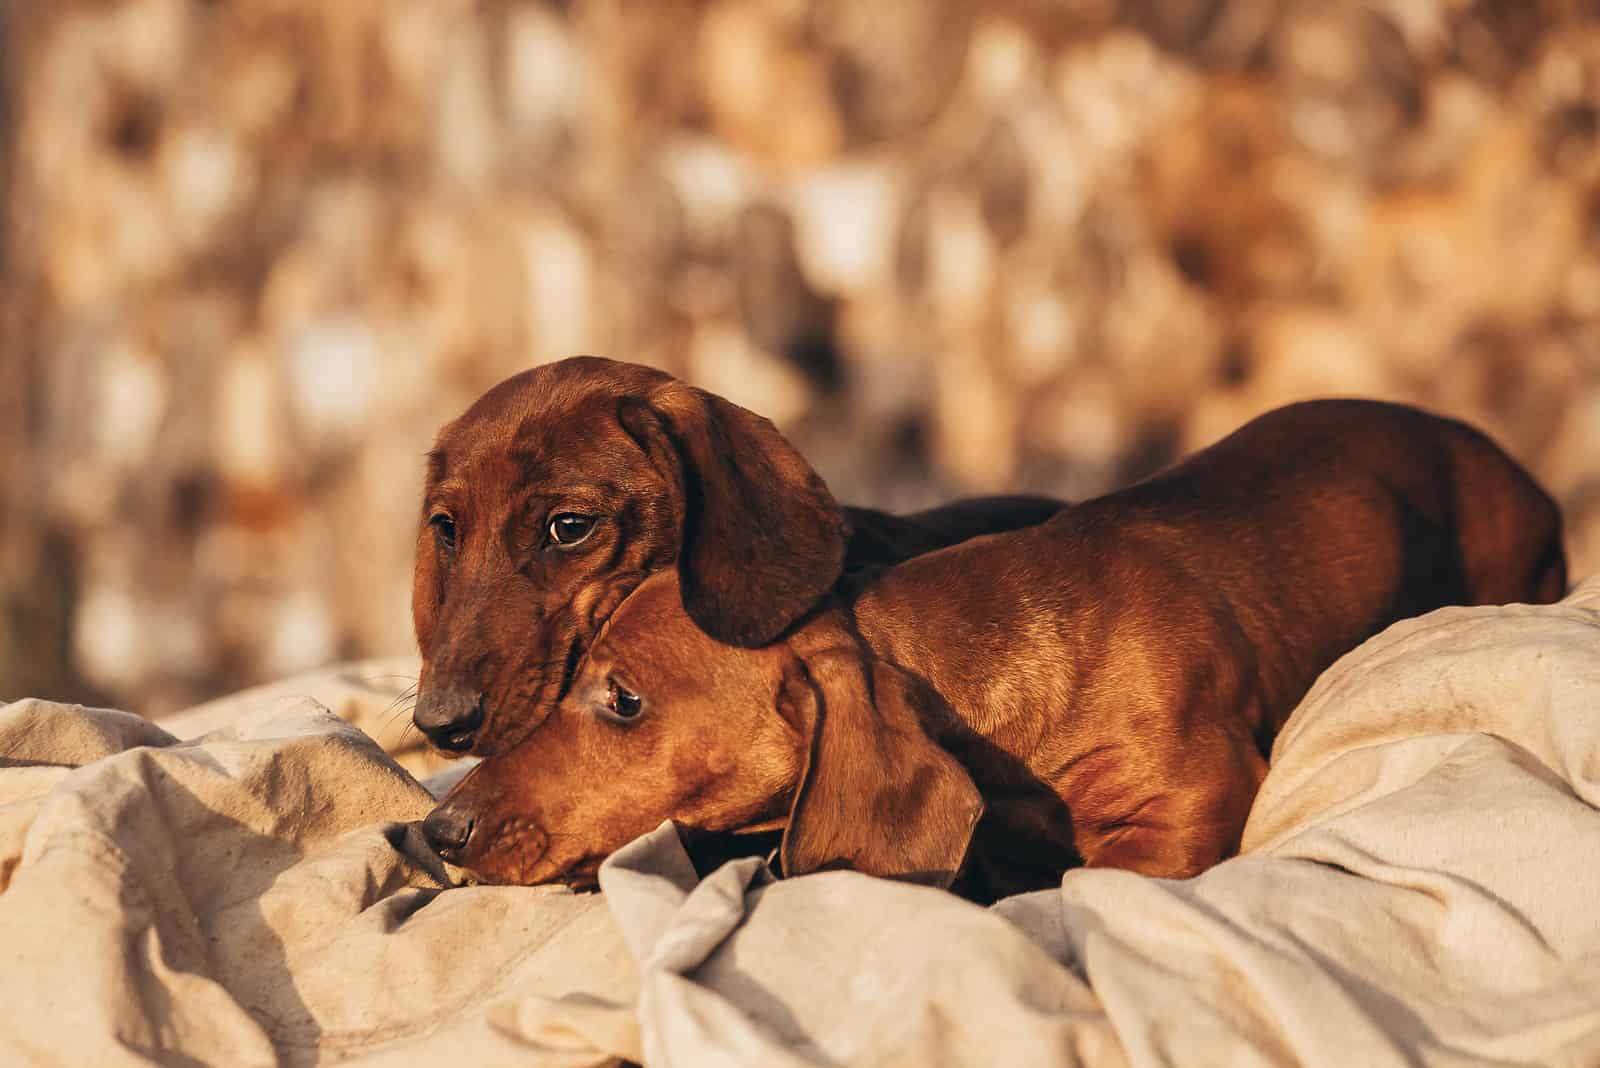 two dachshund dogs lying together